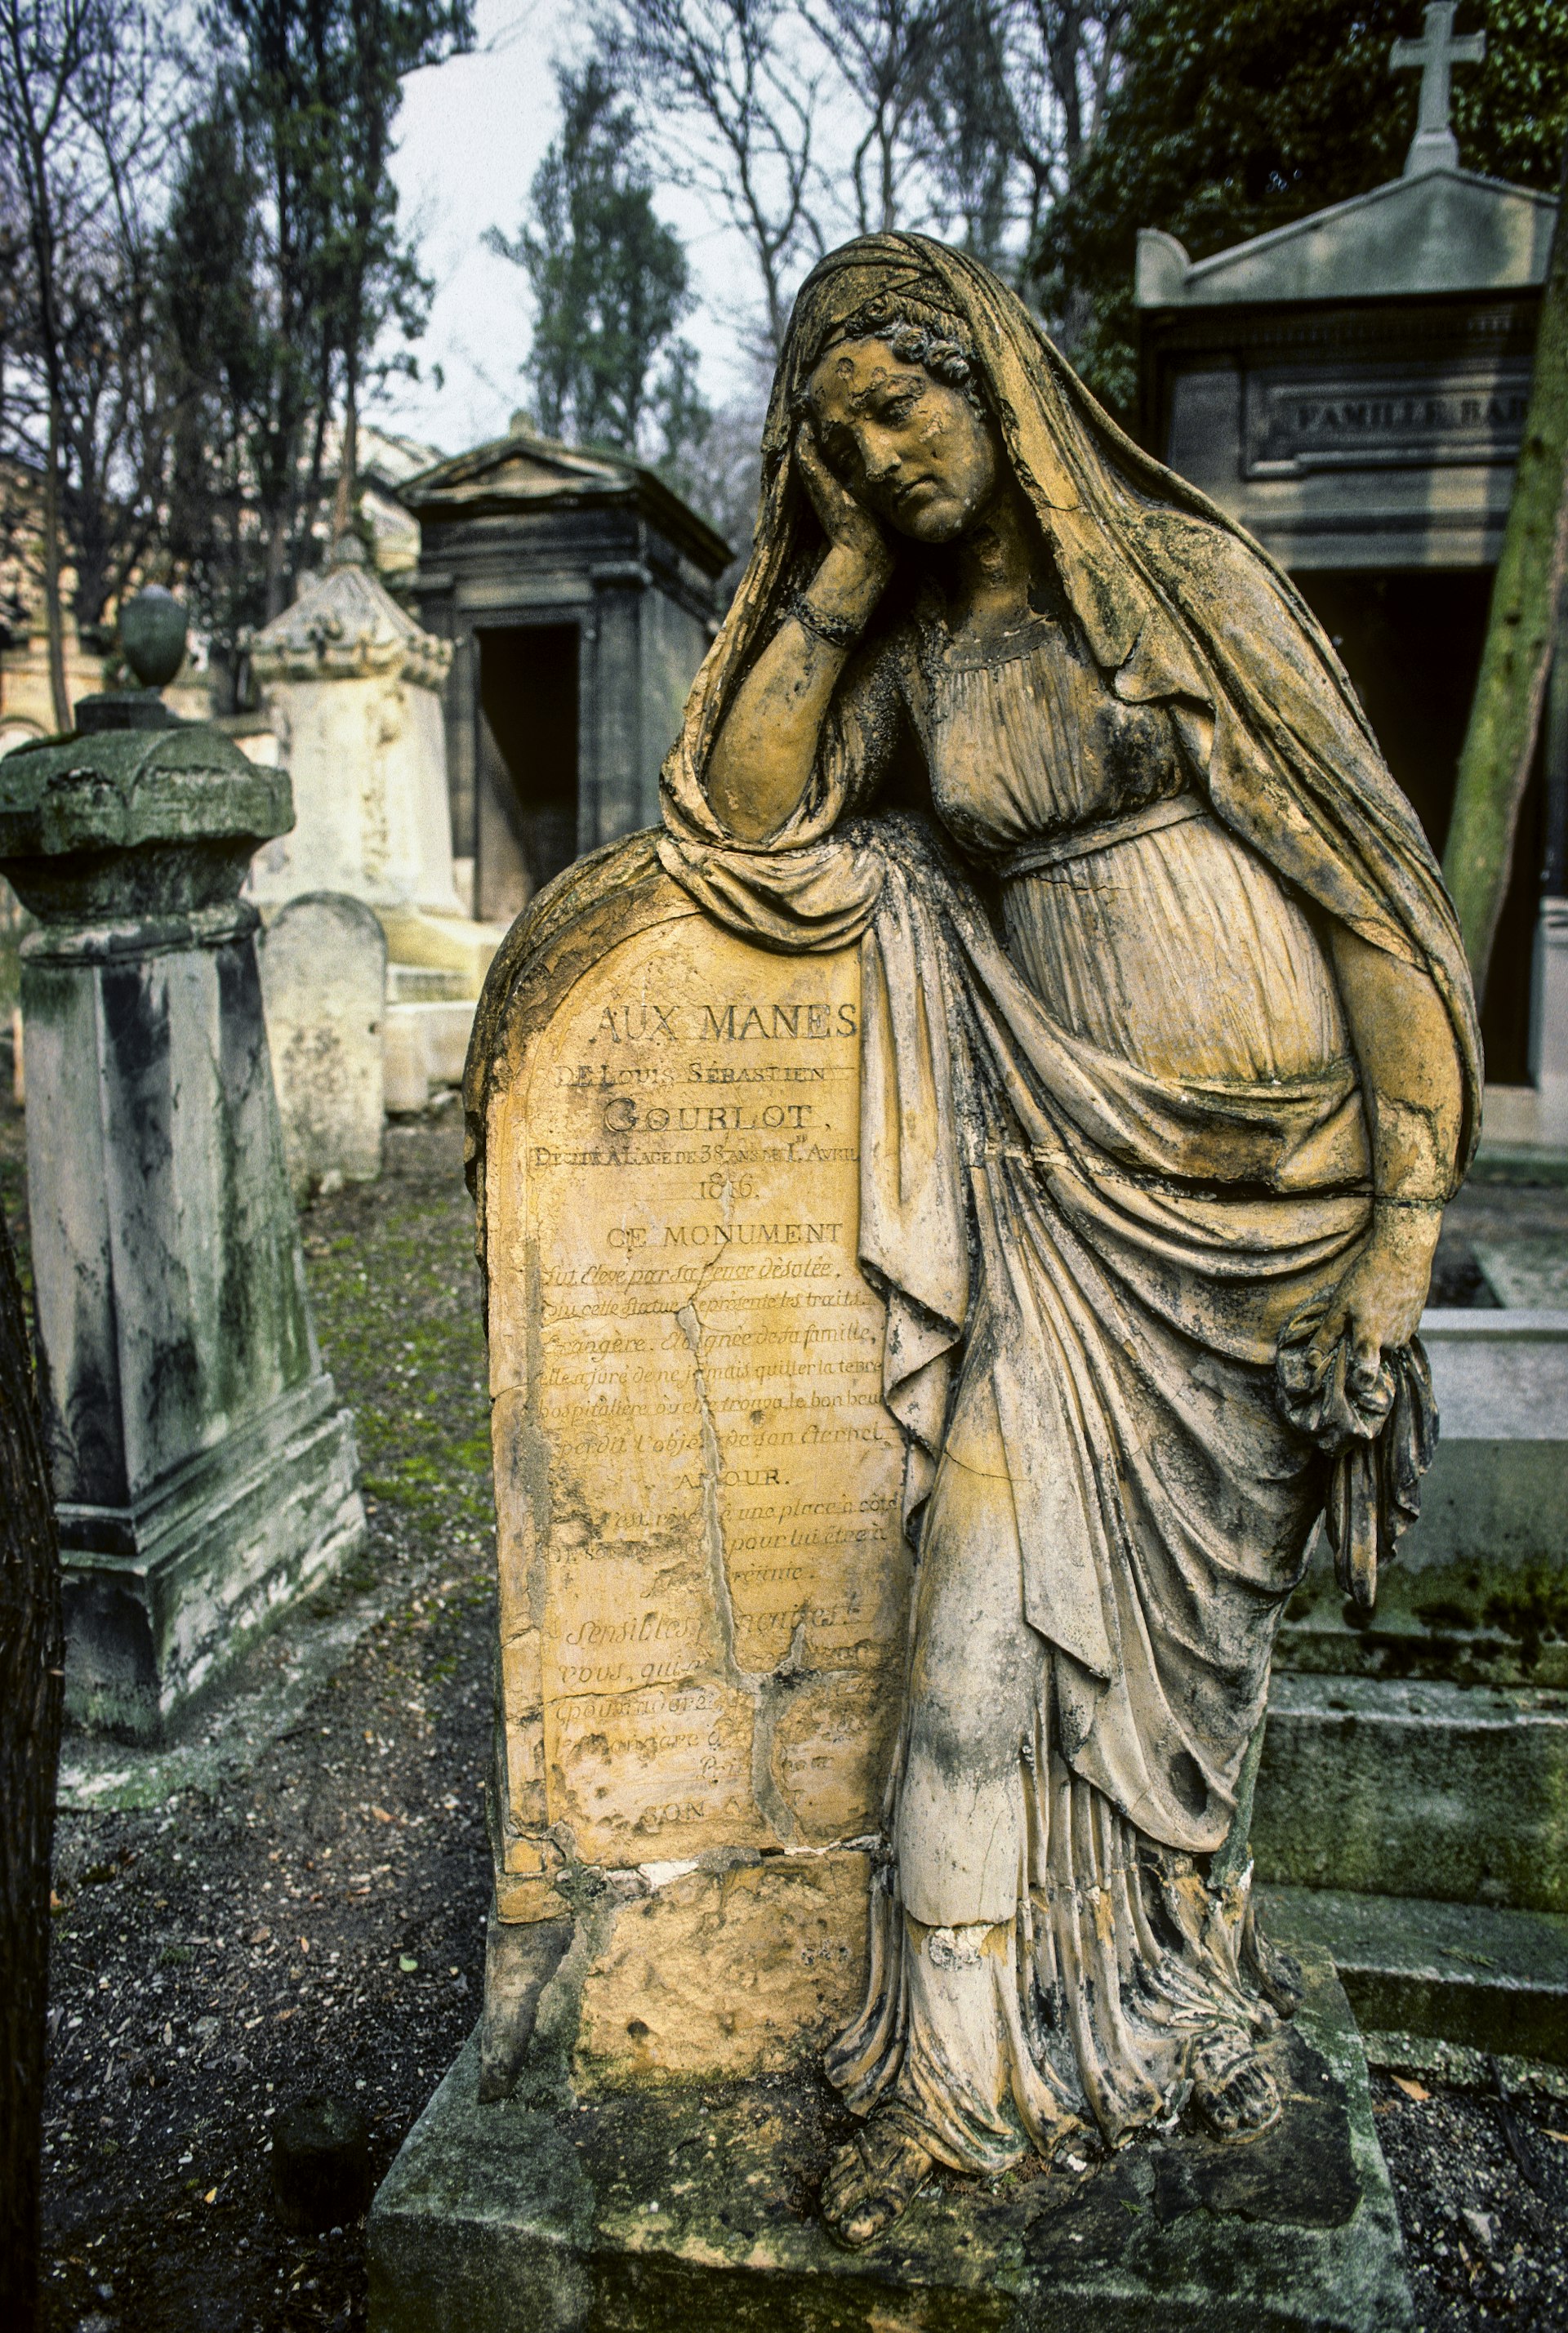 Monuments in Pere Lachaise Cemetery in Paris, France